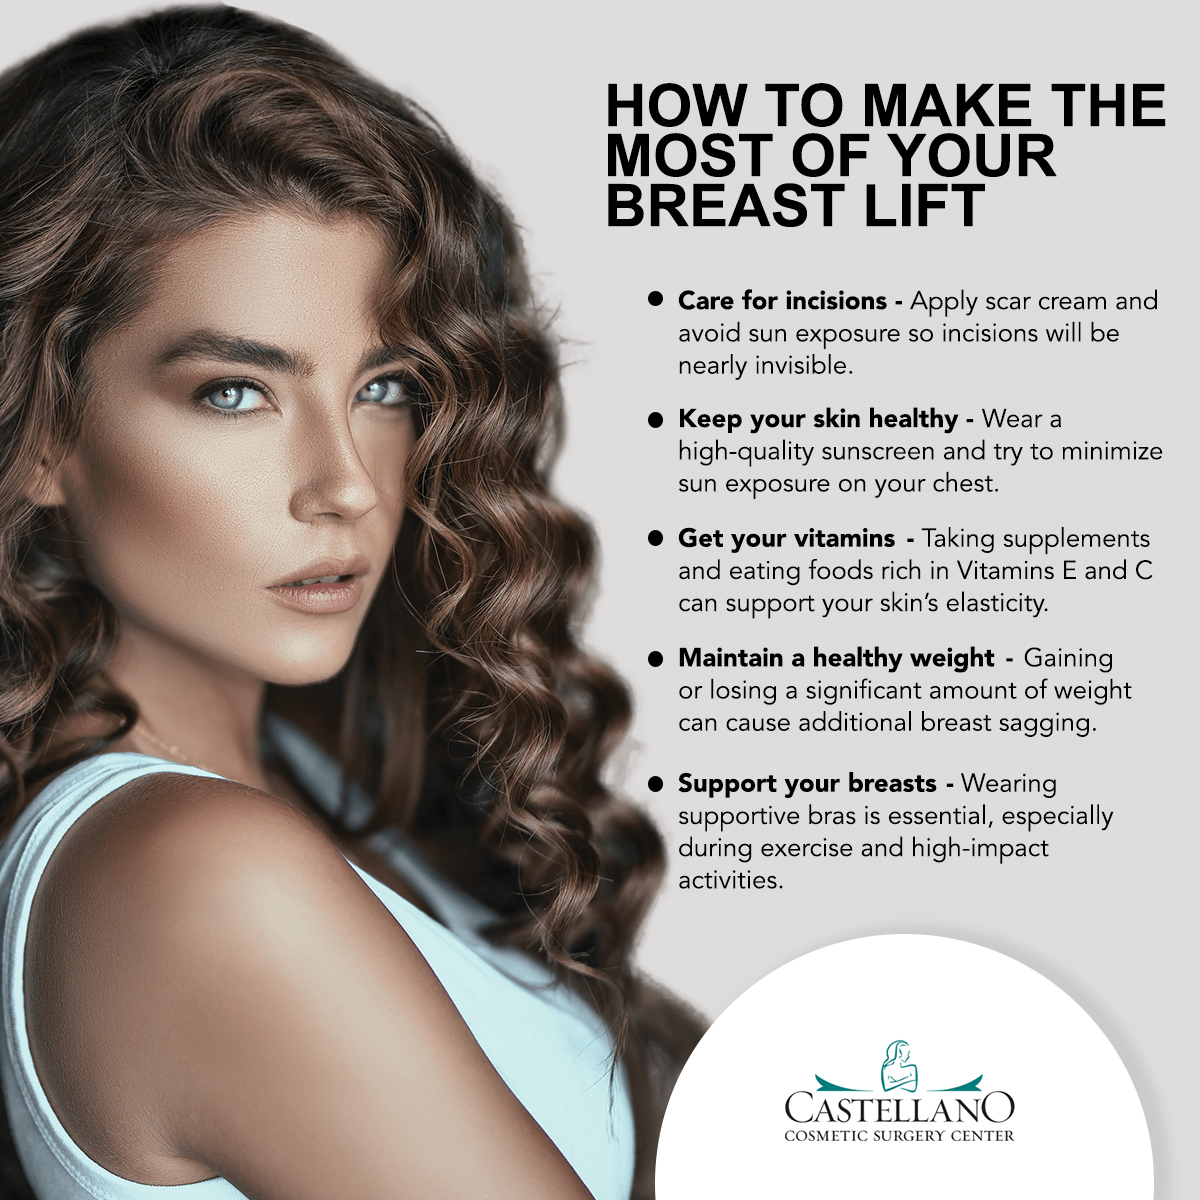 How to Make the Most of Your Breast Lift